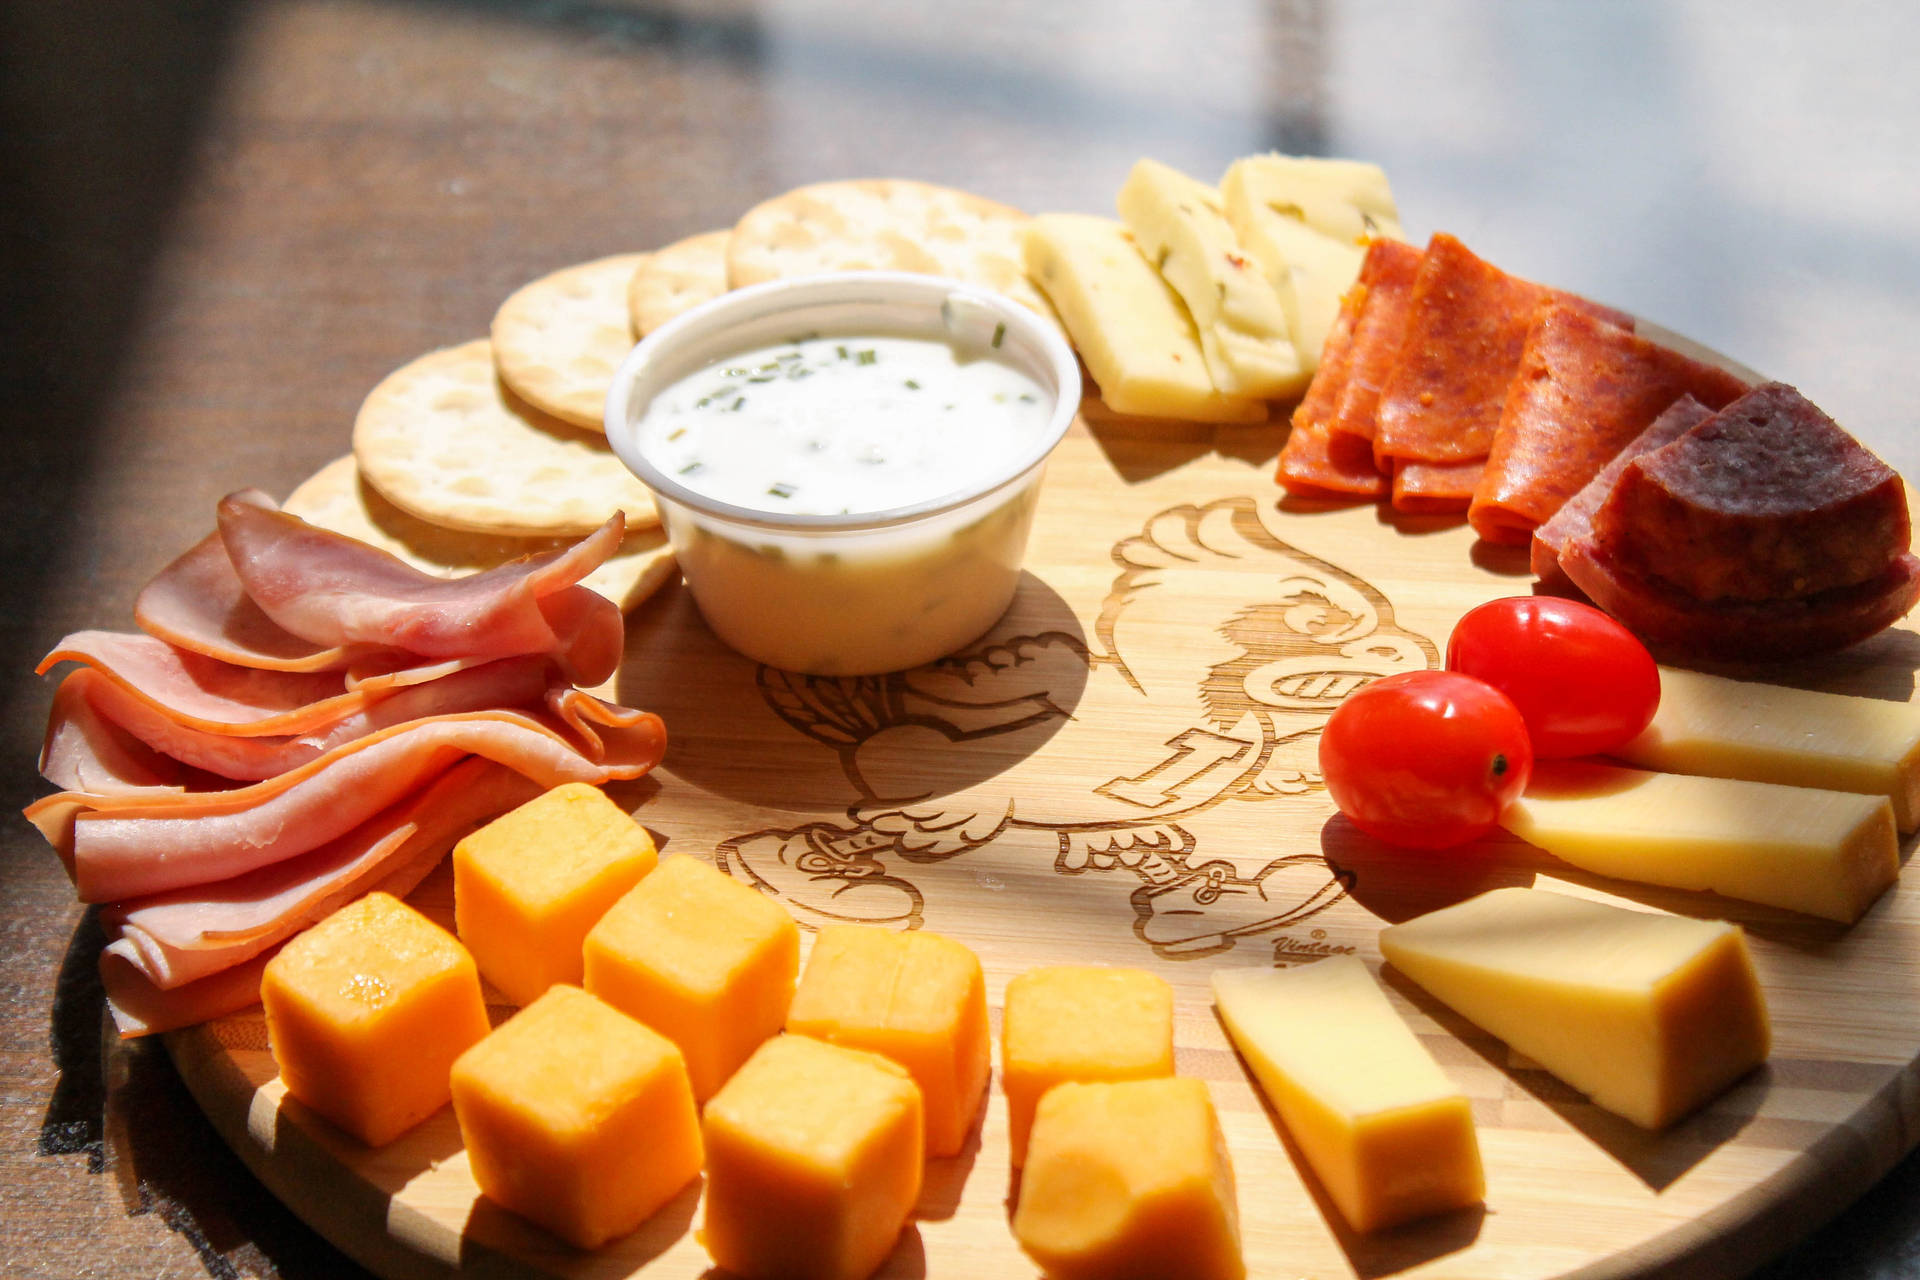 Simple Cheese And Meat Platter Background